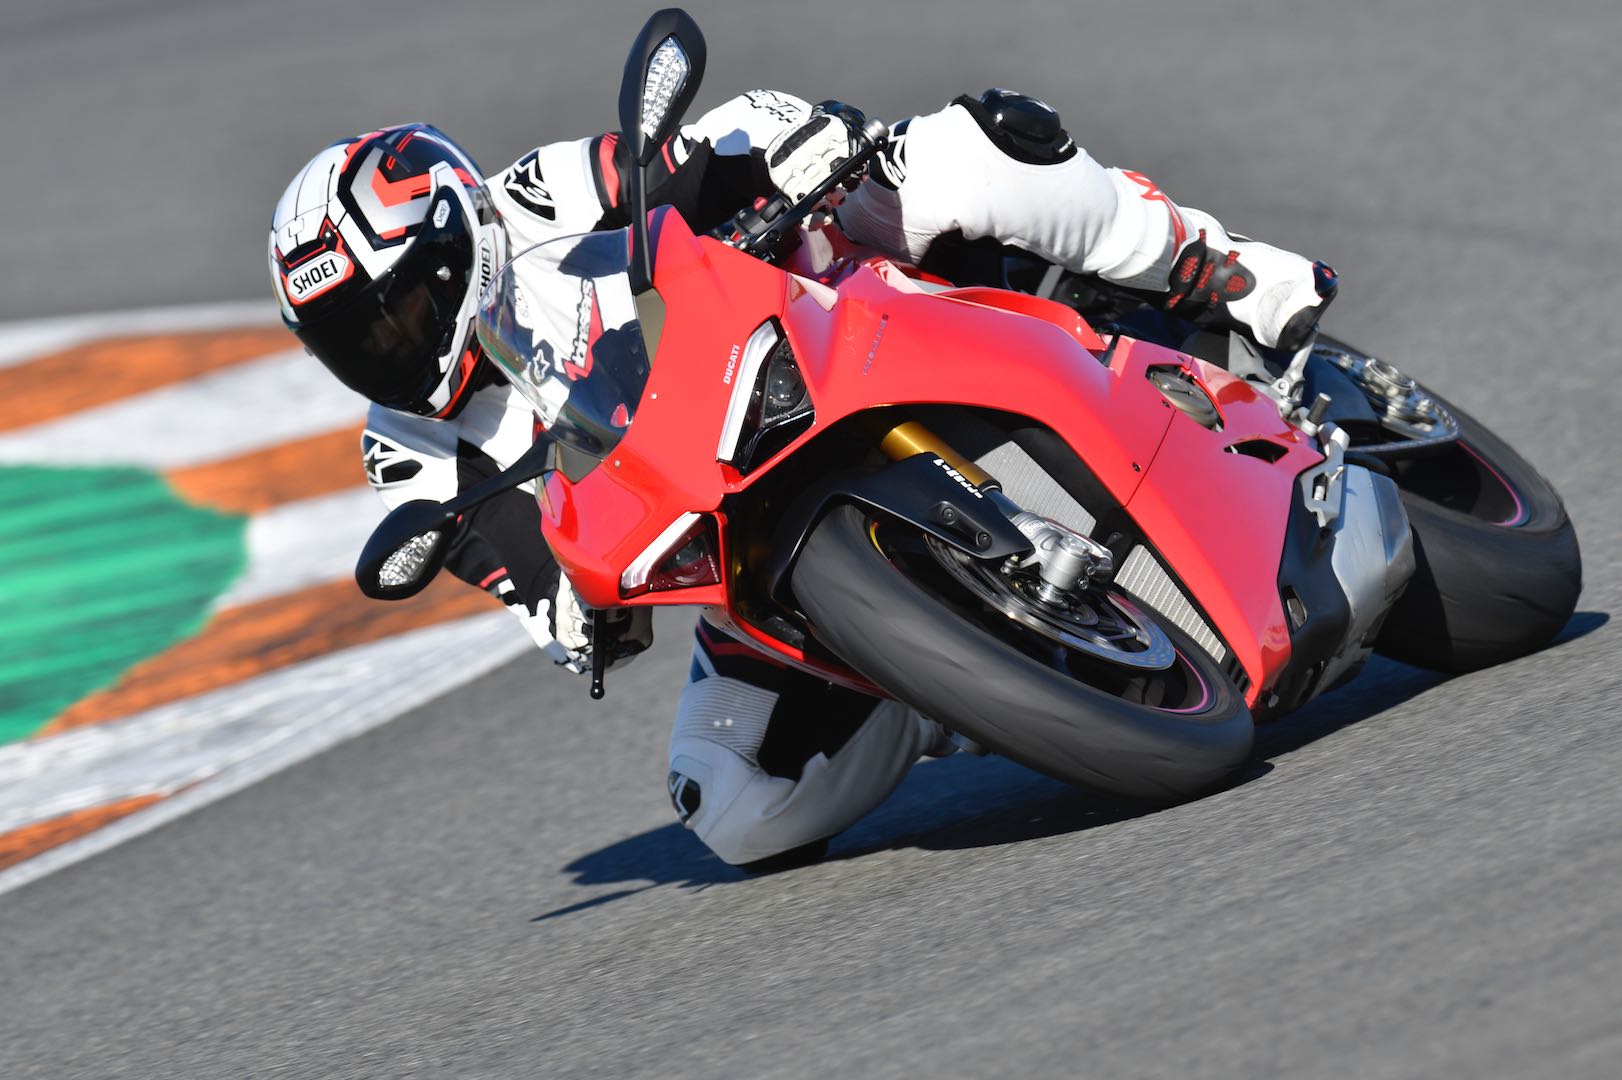 5 Things You Might Not Know About Sport/Superbike Riding